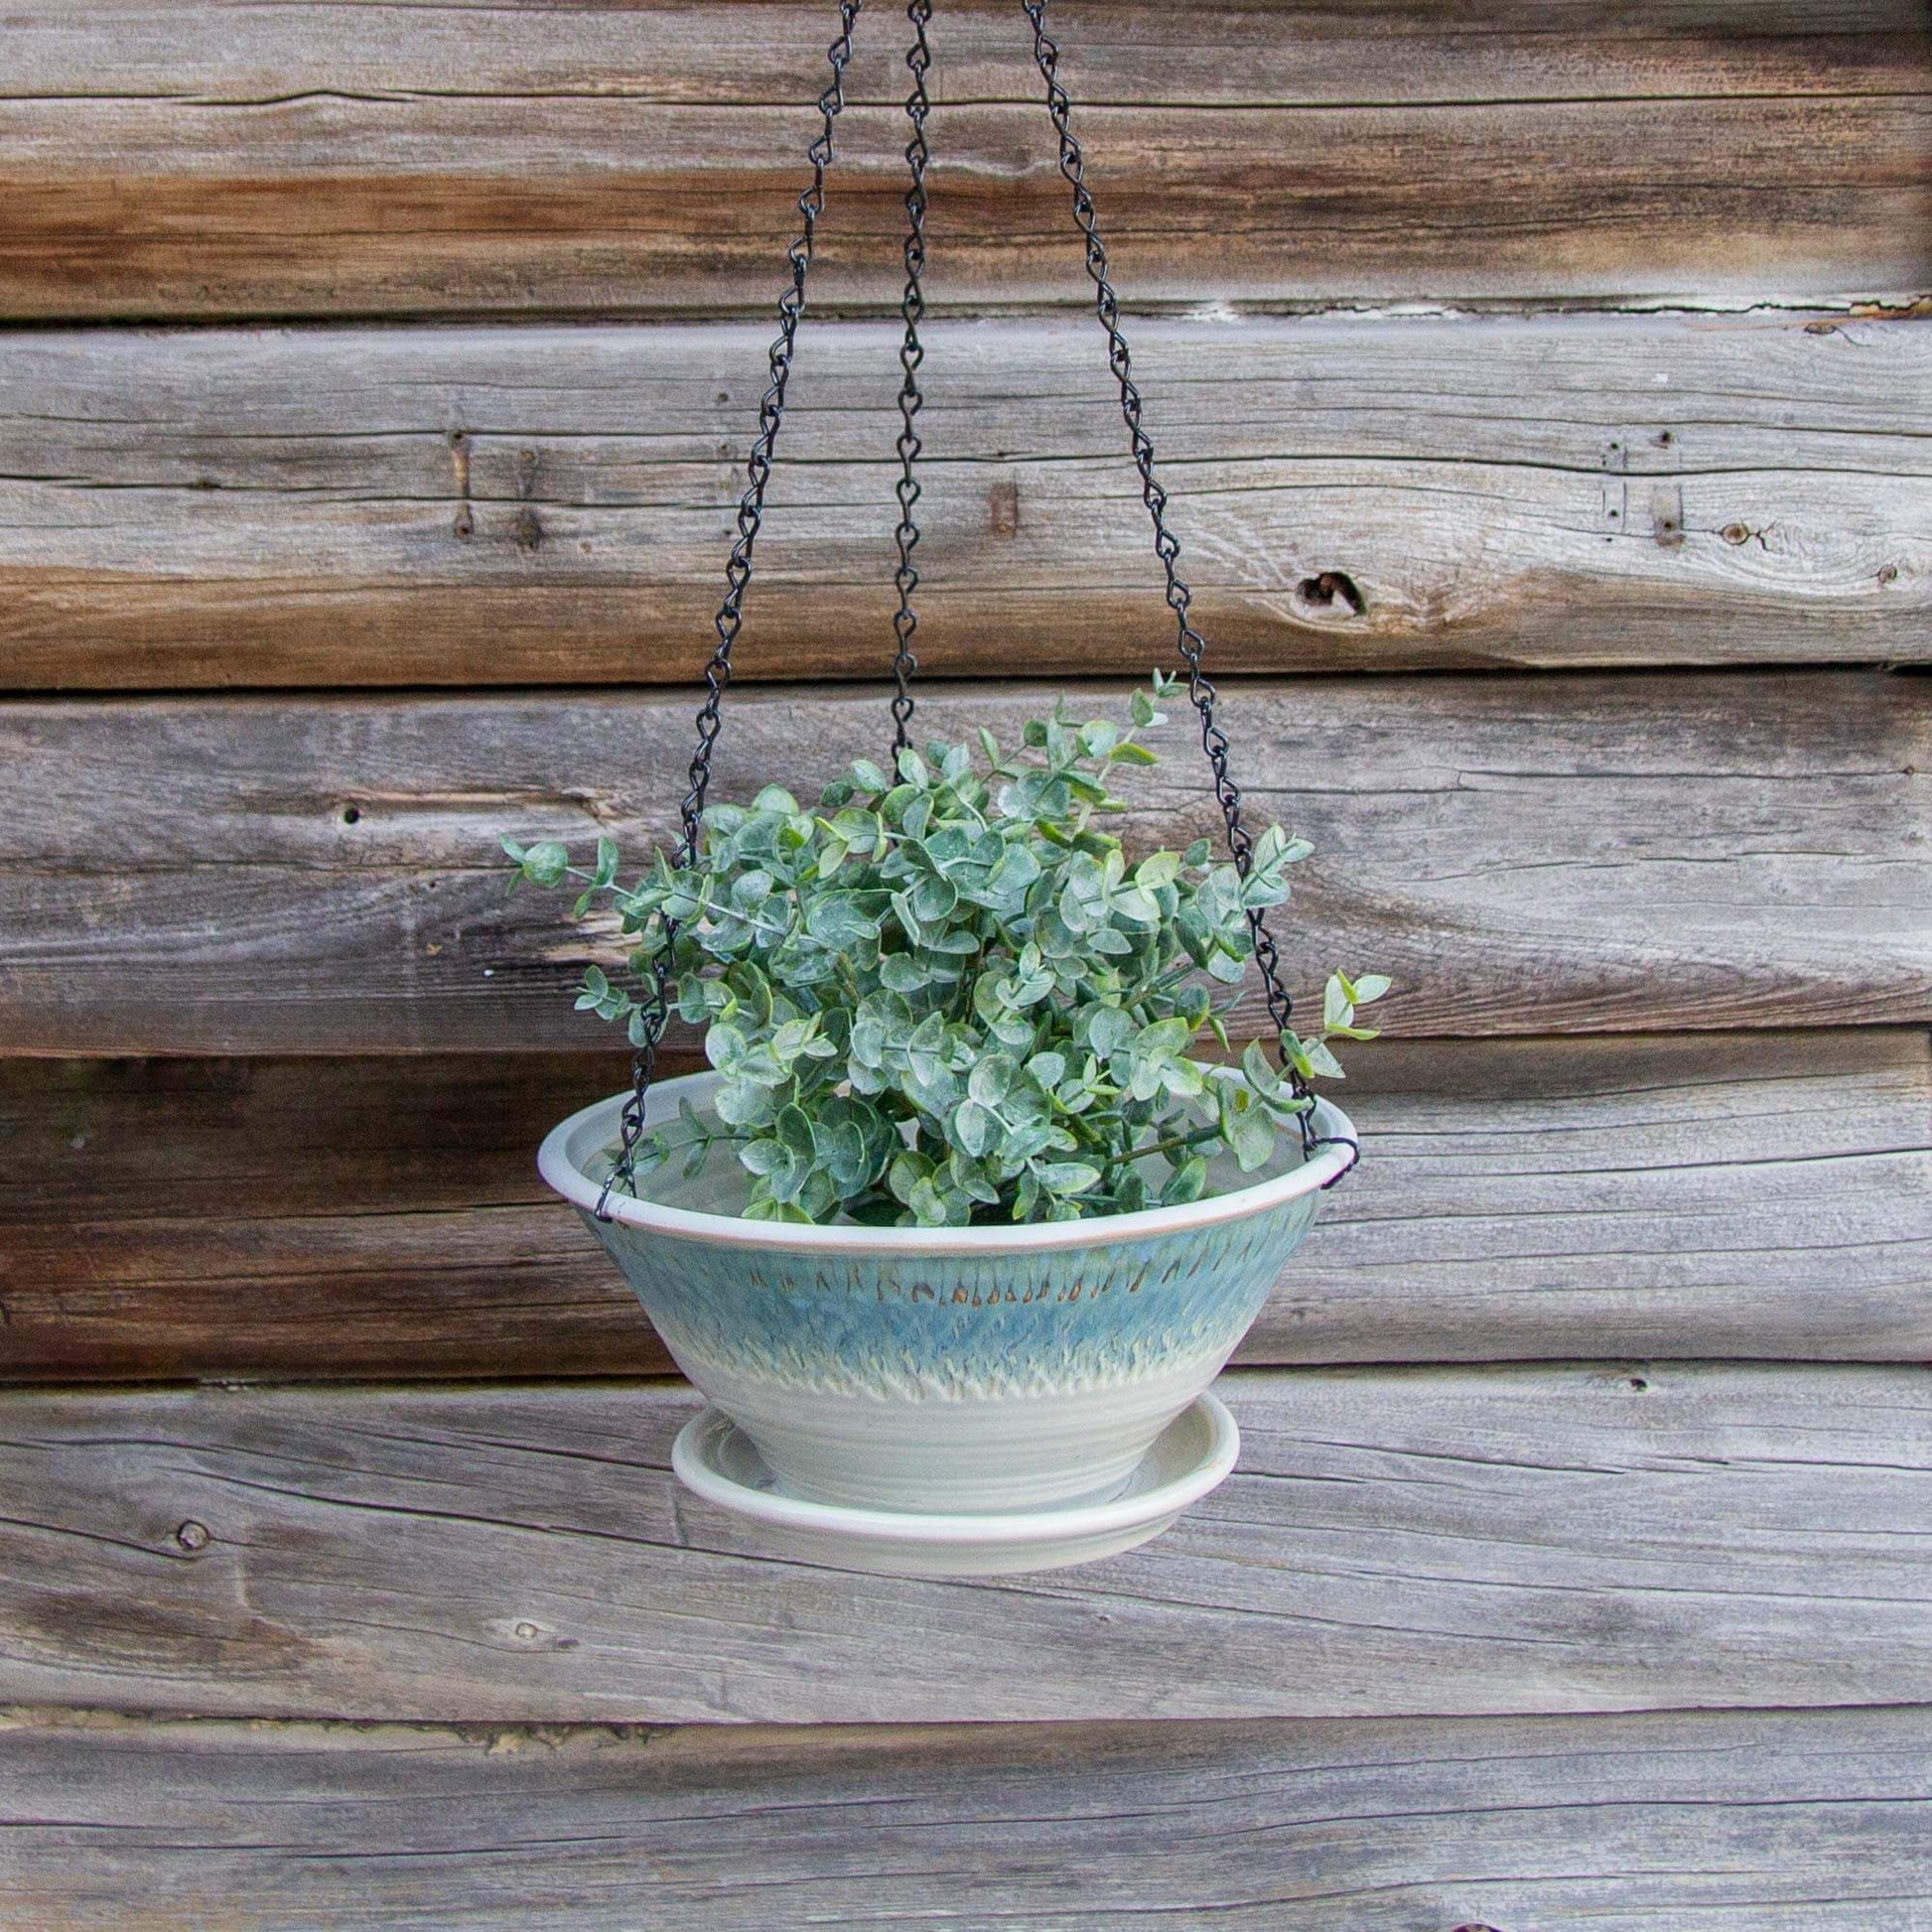 Handmade Pottery 9-1/2 Inch Hanging Planter in Ivory & Blue pattern made by Georgetown Pottery in Maine